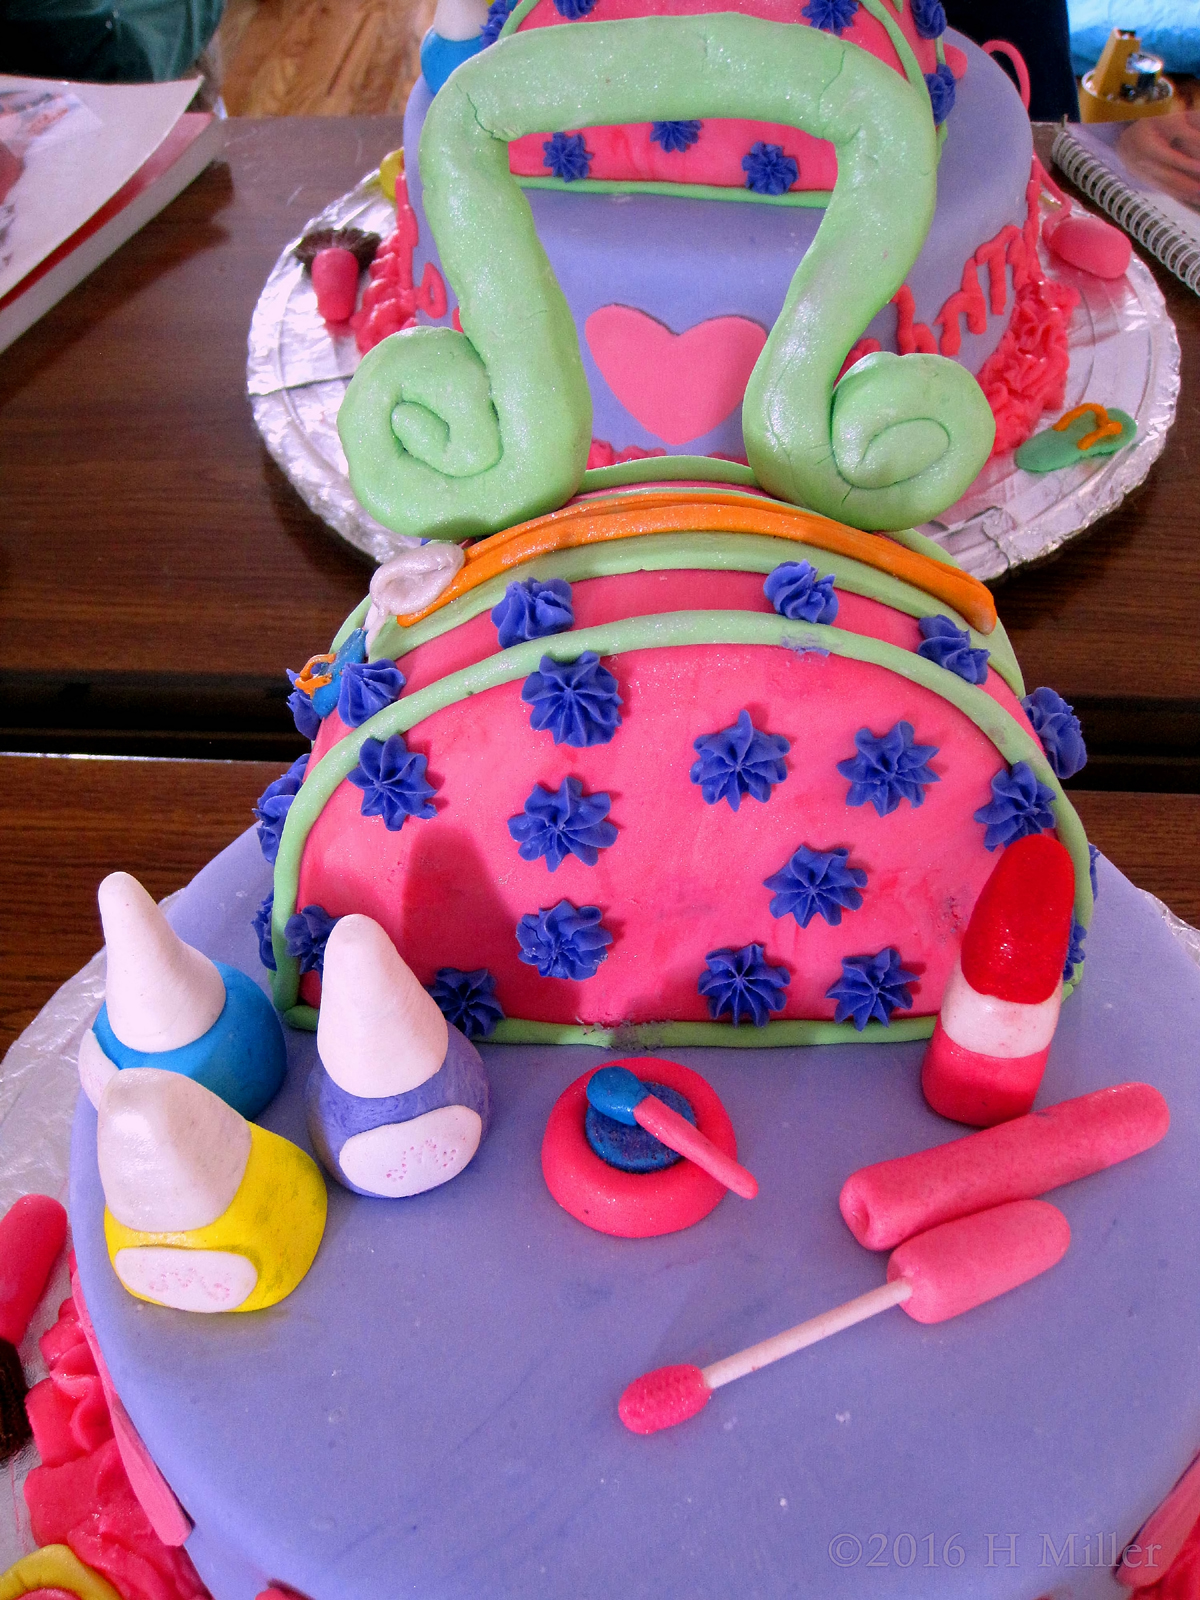 Awesome Home Spa Birthday Cake With Makeup And A Carrying Case! Adorable! 